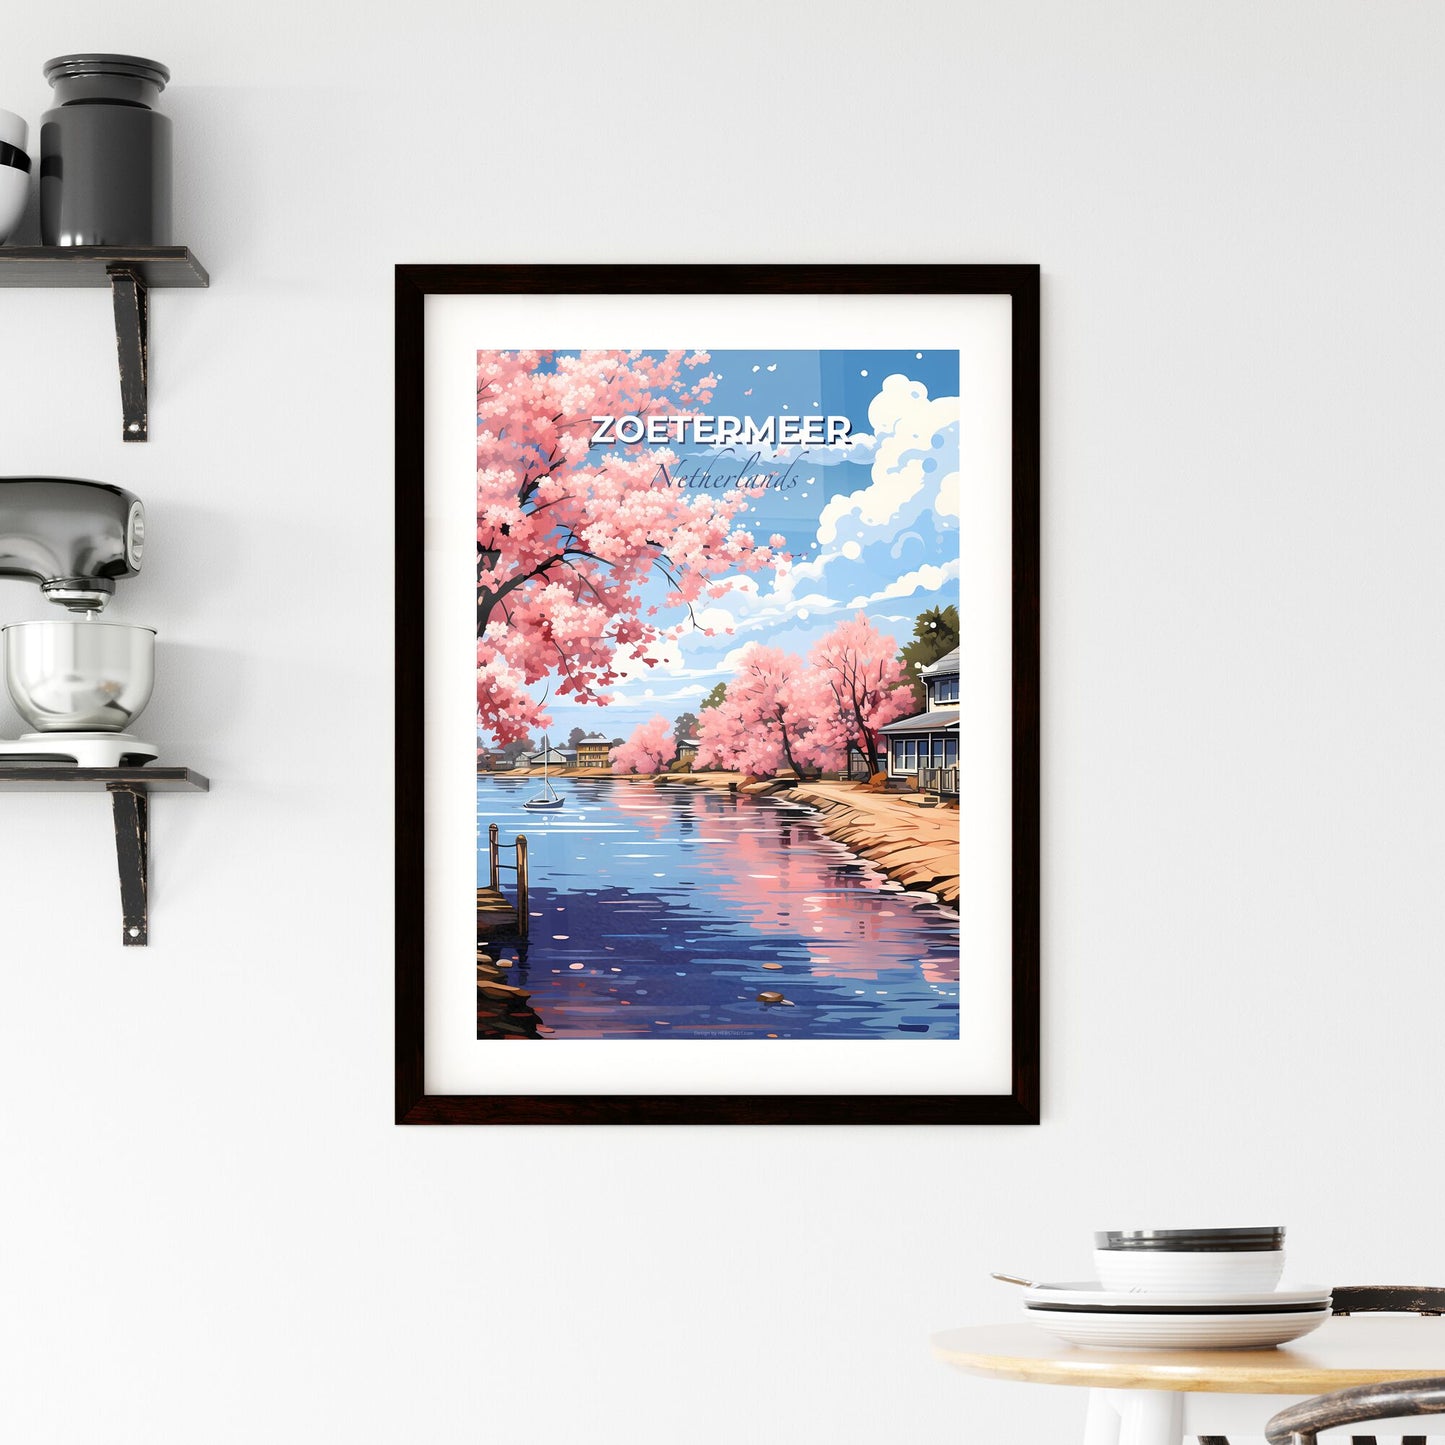 Zoetermeer, Netherlands, A Poster of a water body with pink flowers and houses on the side Default Title